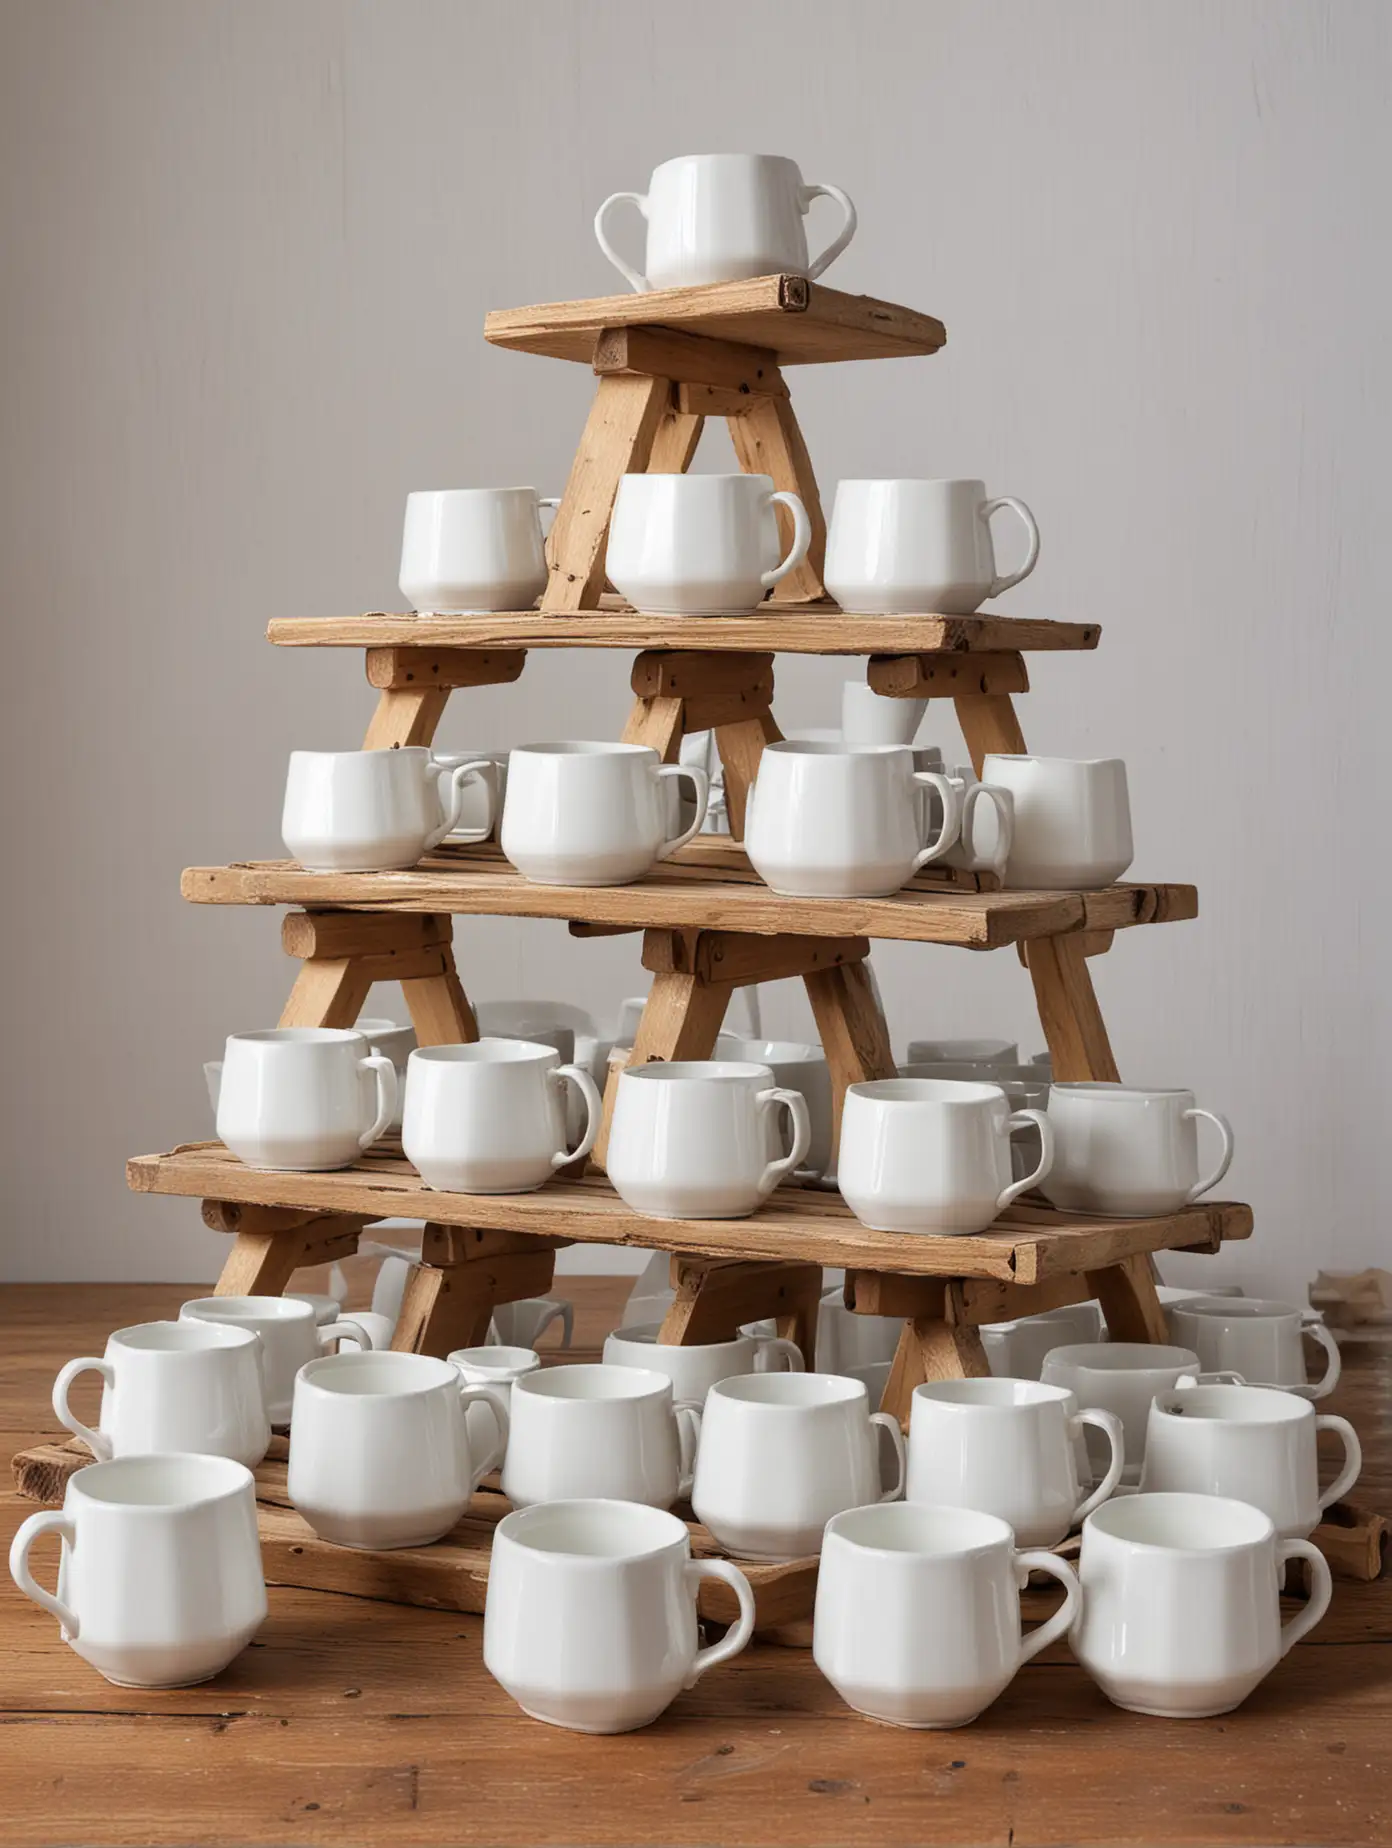 Vintage Table Displaying 20 White Mugs in a Pyramid Formation